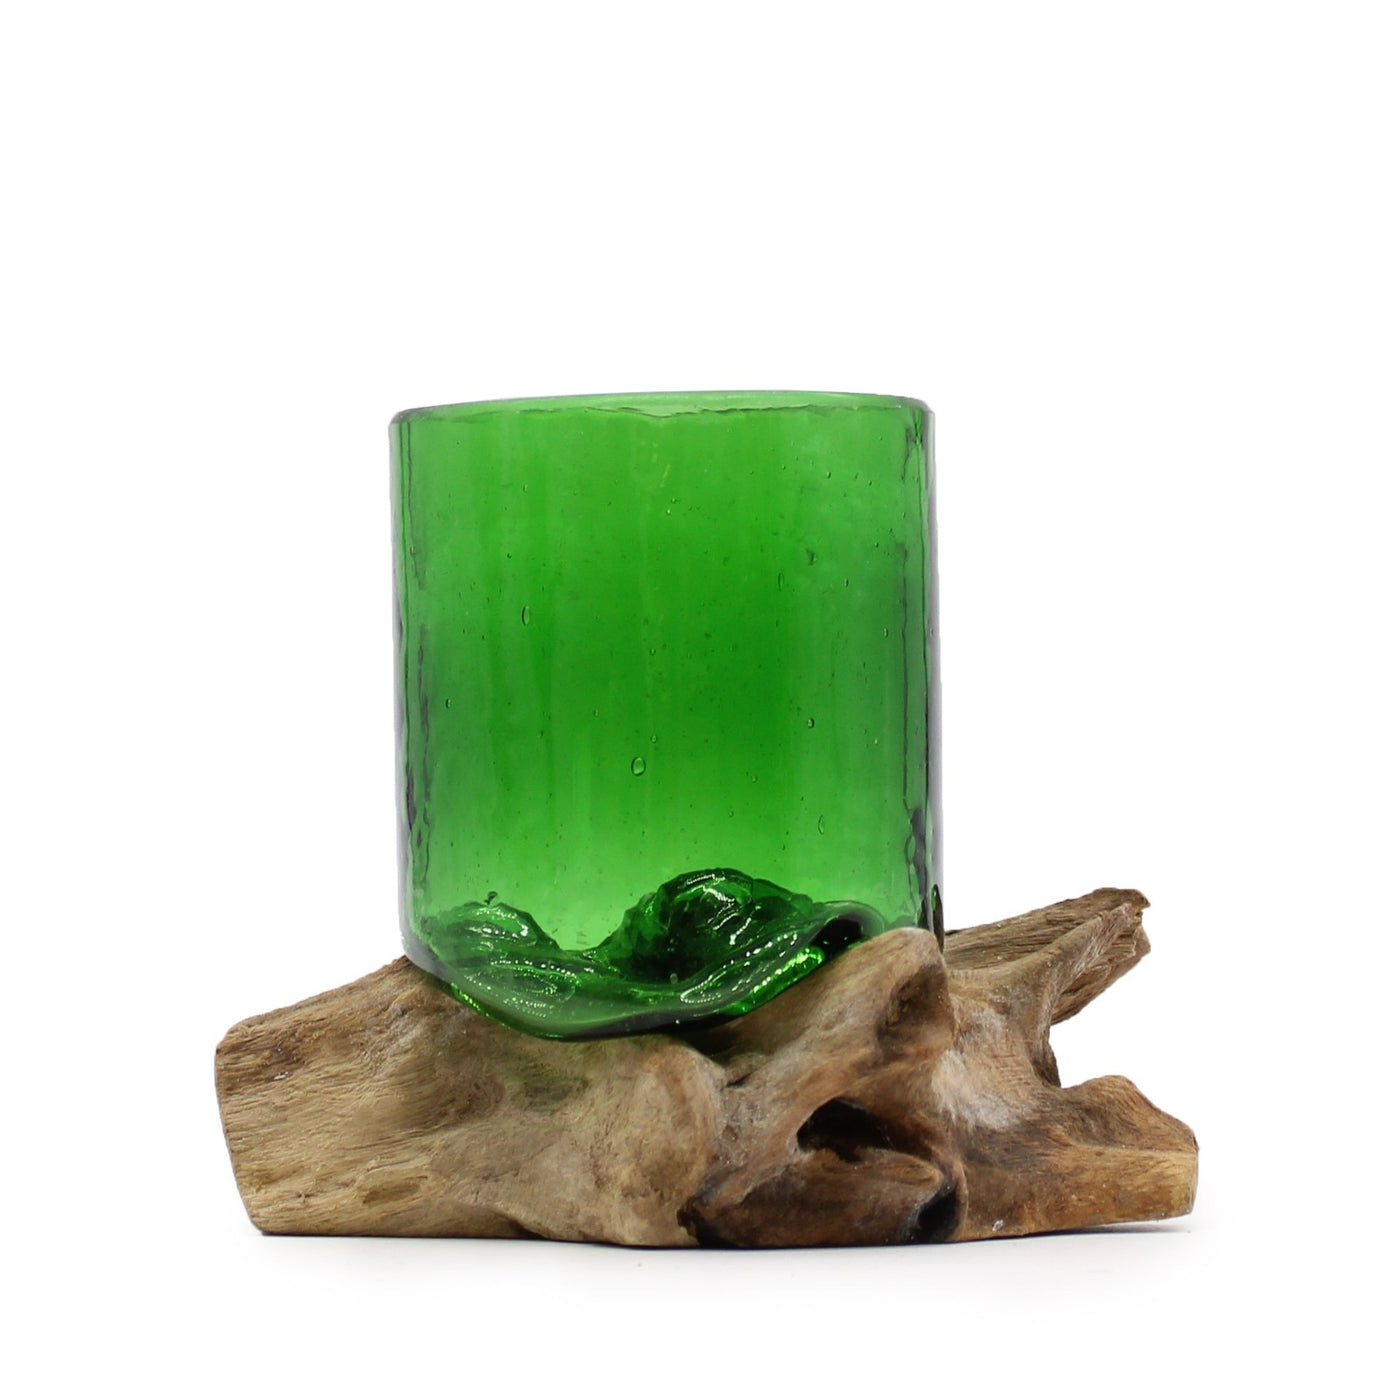 Sustainable Recycled Green Novelty Beer Glass On Wooden Base Novelty Natural Gift.